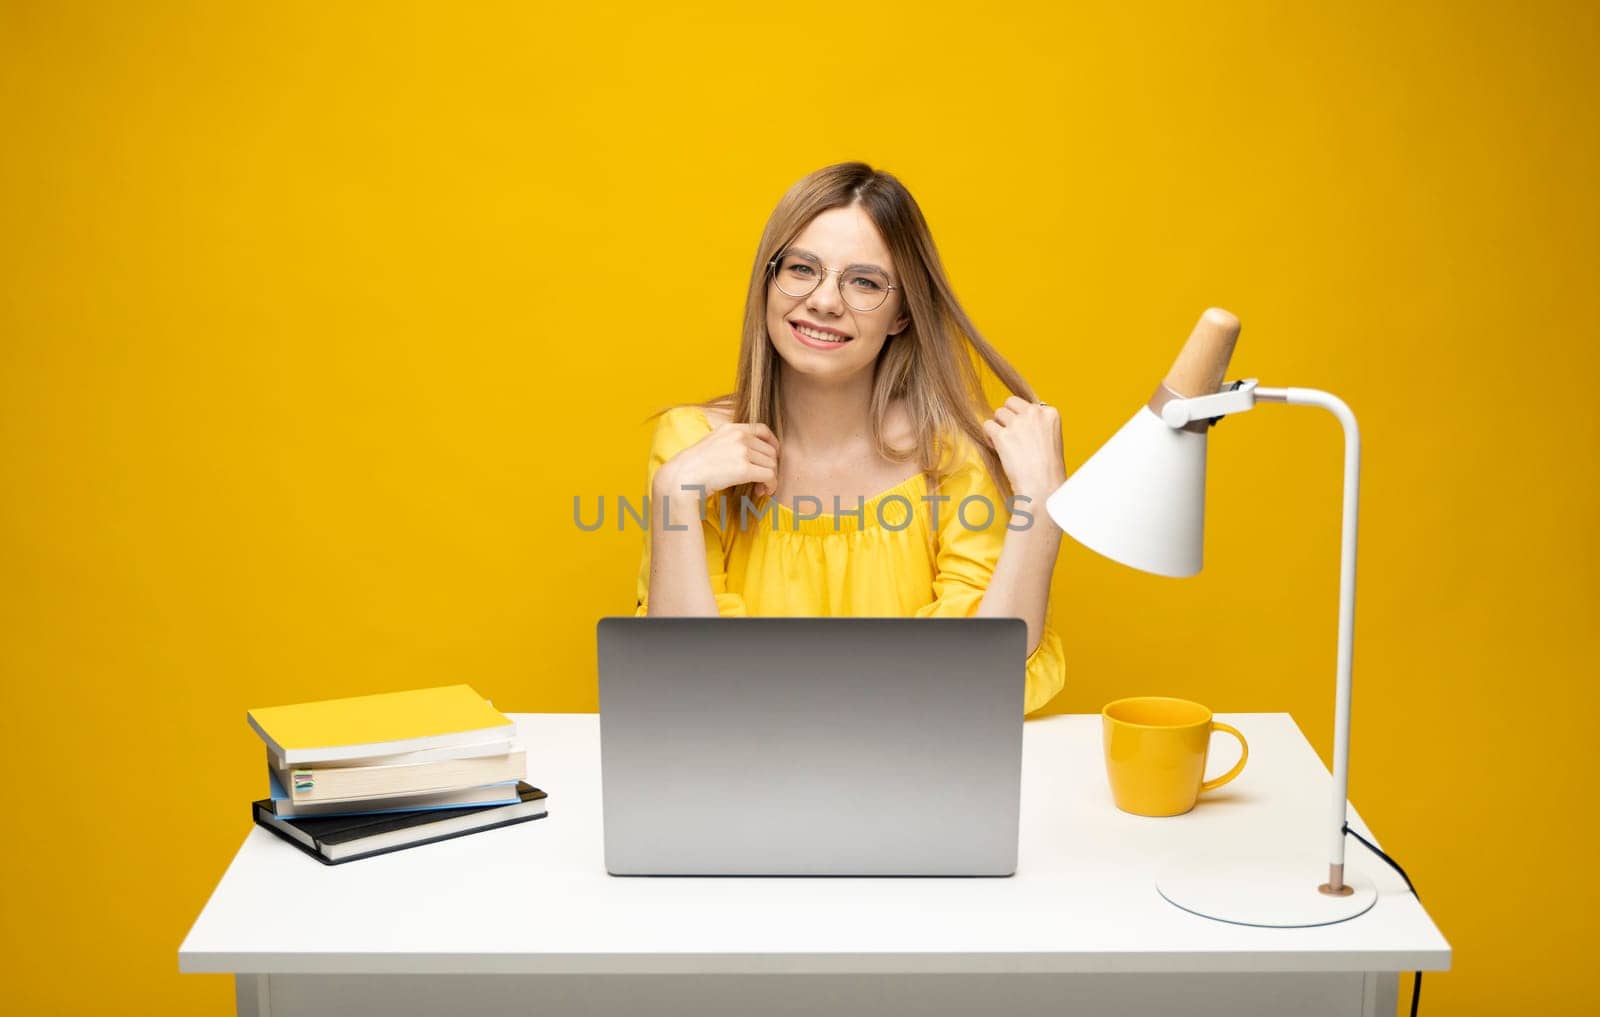 Portrait of Smiling pretty young woman studying while sitting at the table with grey laptop computer, notebook. Business woman working with a laptop isolated on a yellow background